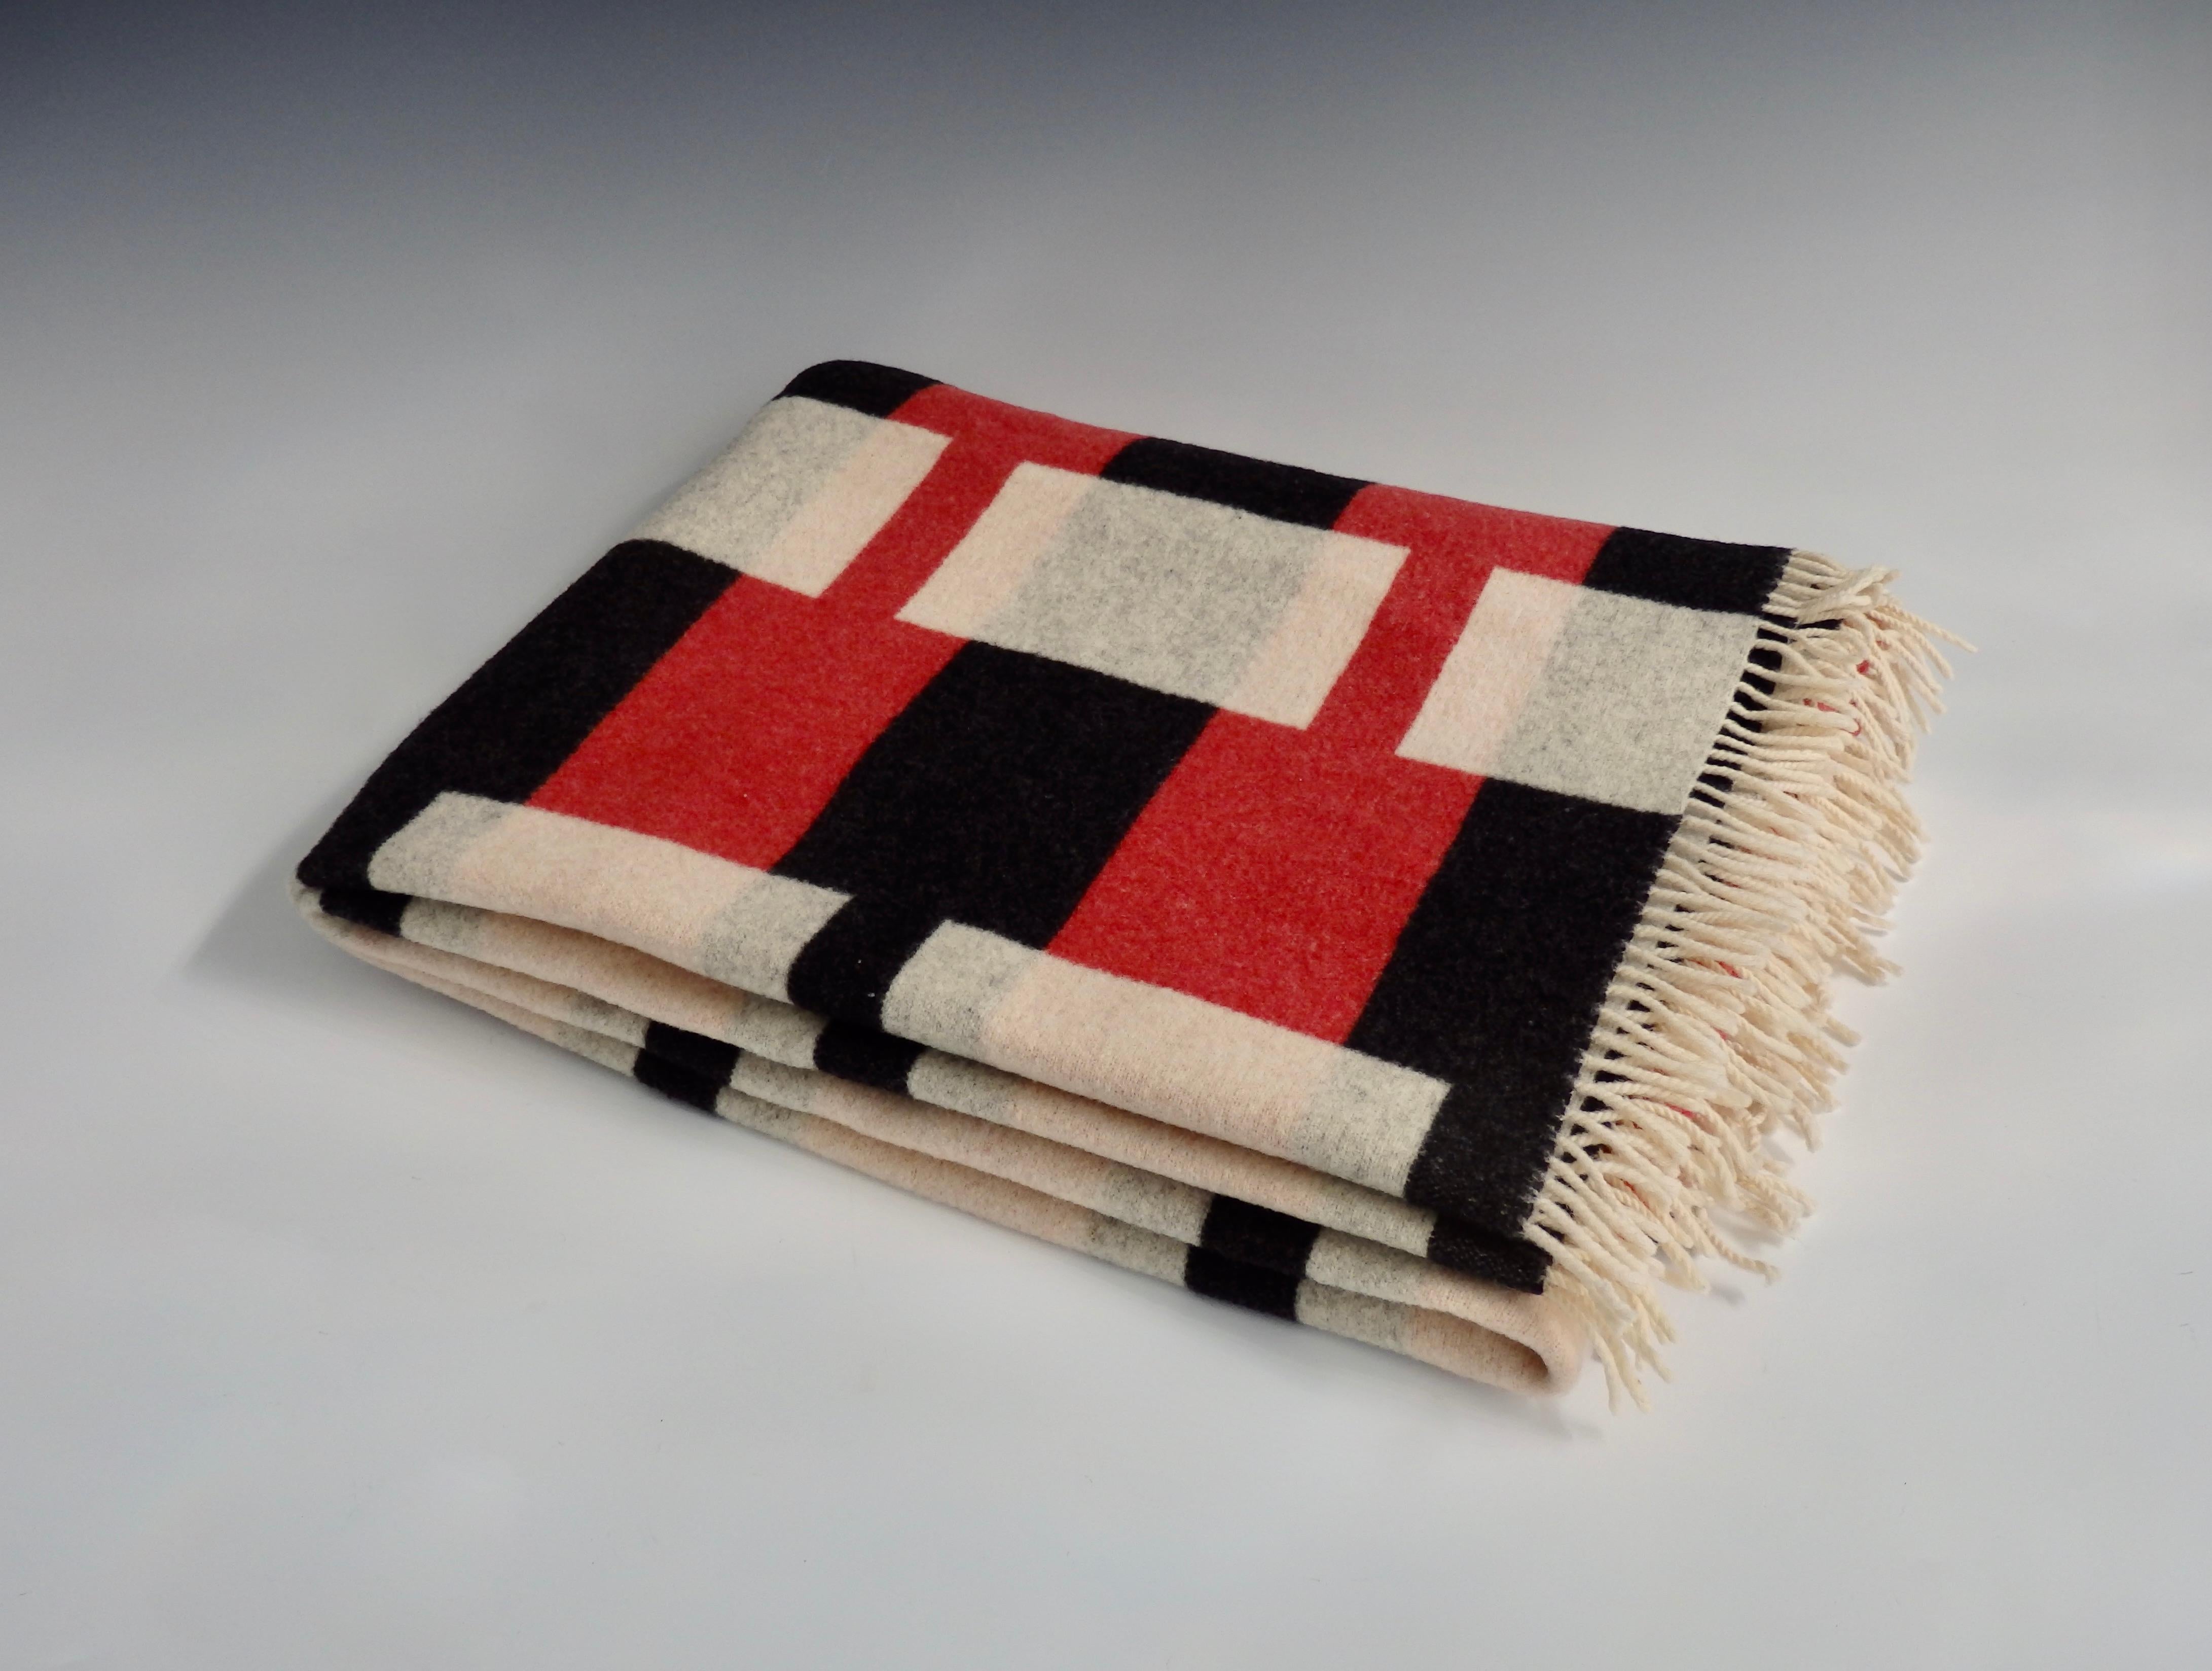 Art Deco style wool throw blanket.
Charcoal black, crimson red, and cream.
Made in New Zealand by Roslyn.